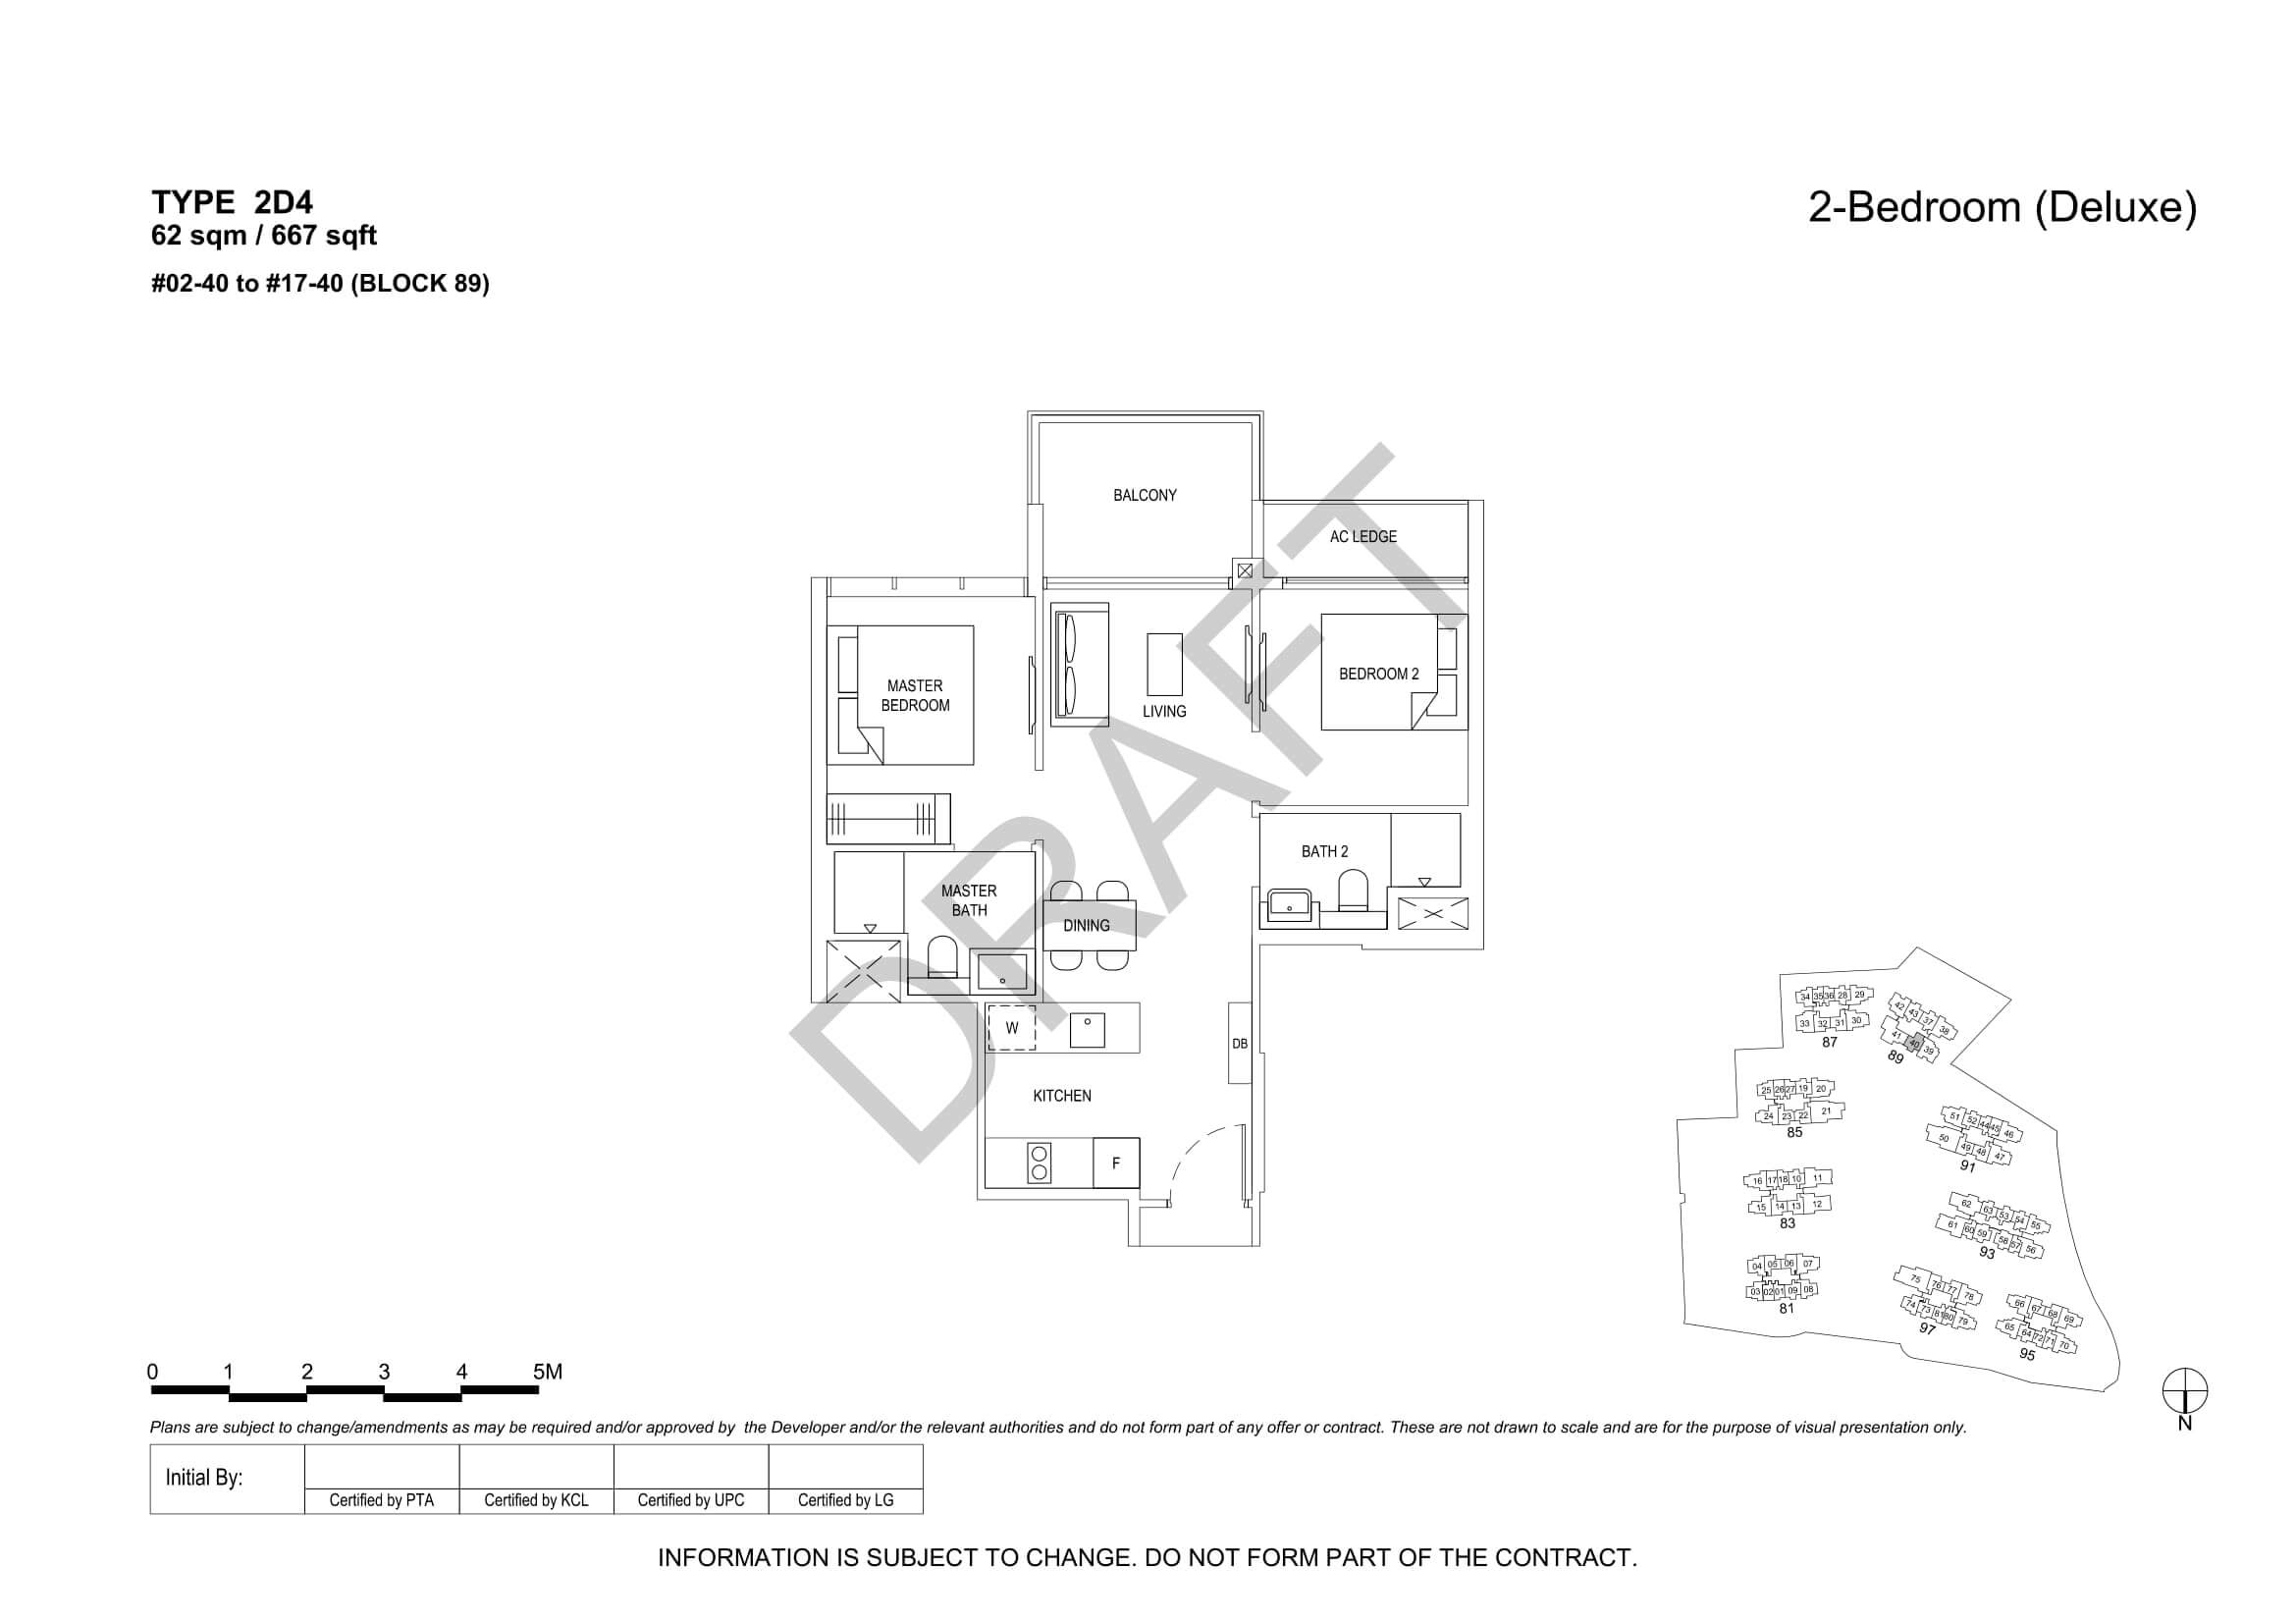 The Florence Residences Floor Plan 2-Bedroom Type 2D4